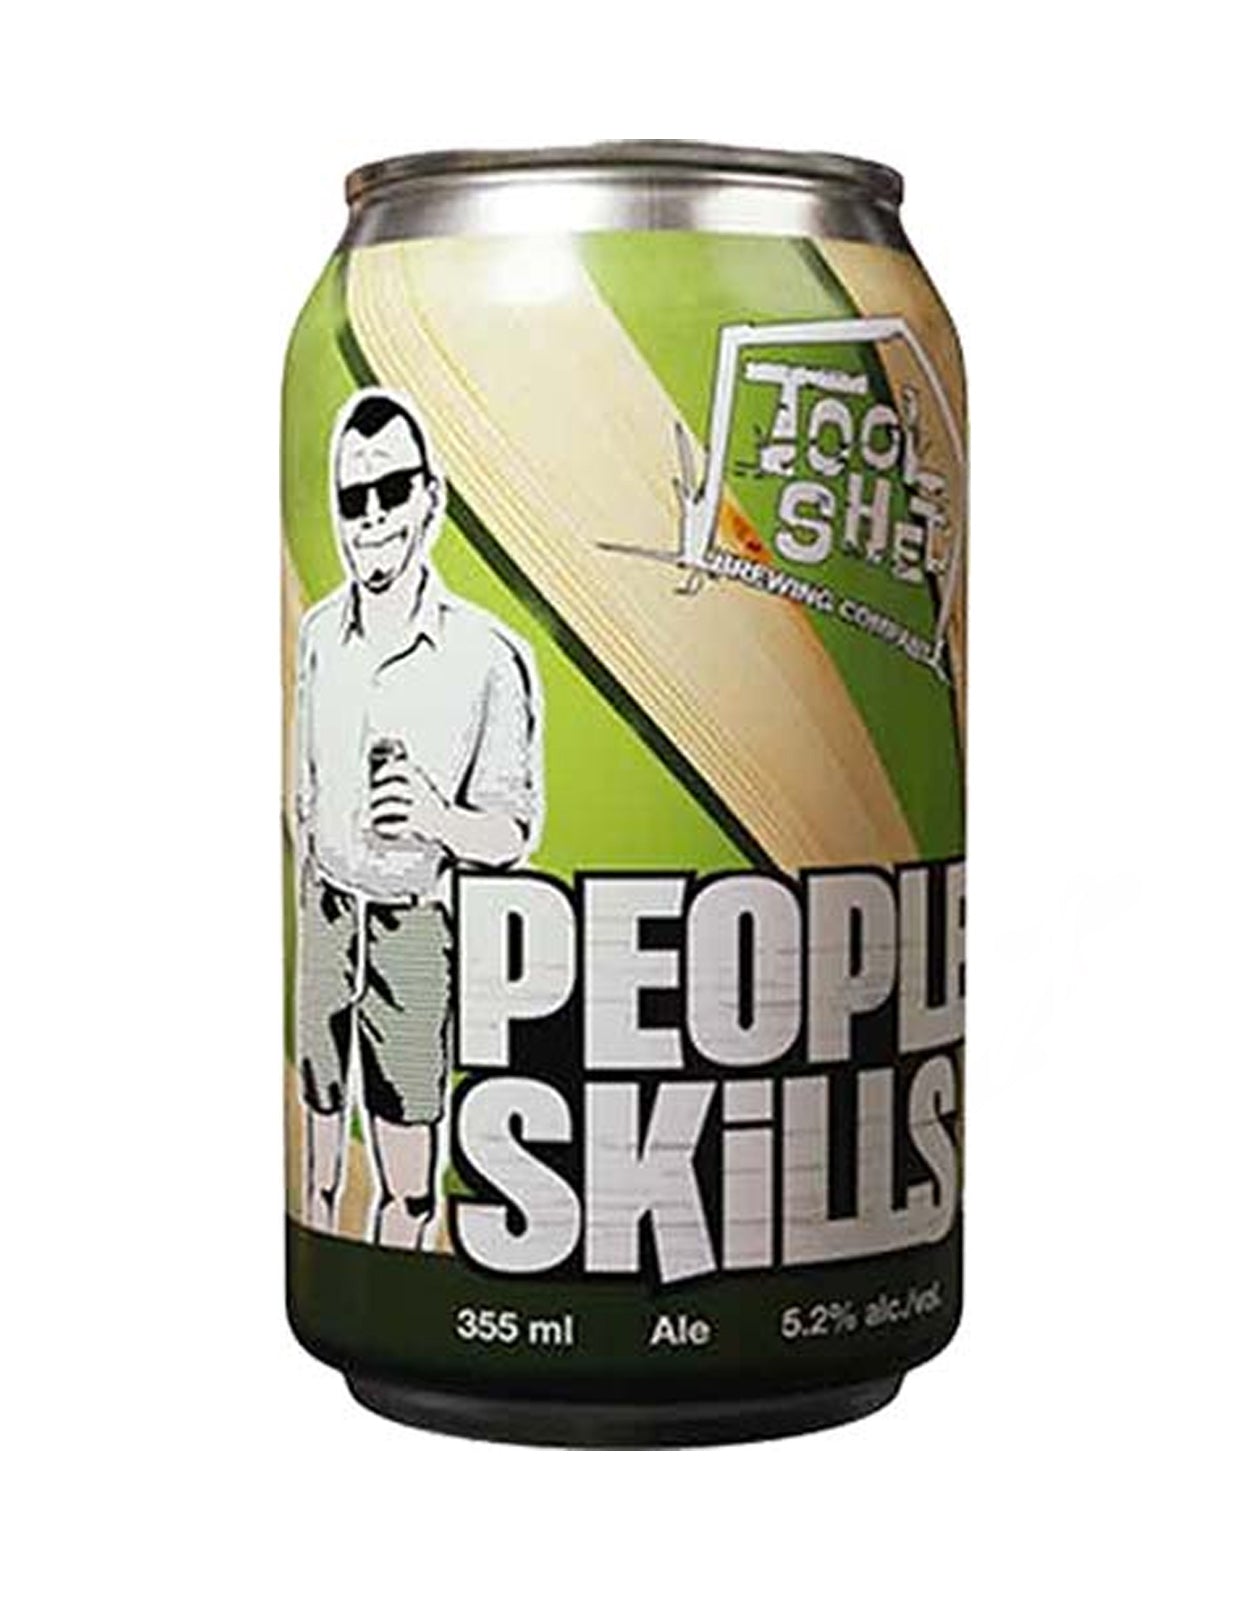 Tool Shed People Skills Cream Ale 355 ml - 6 Cans